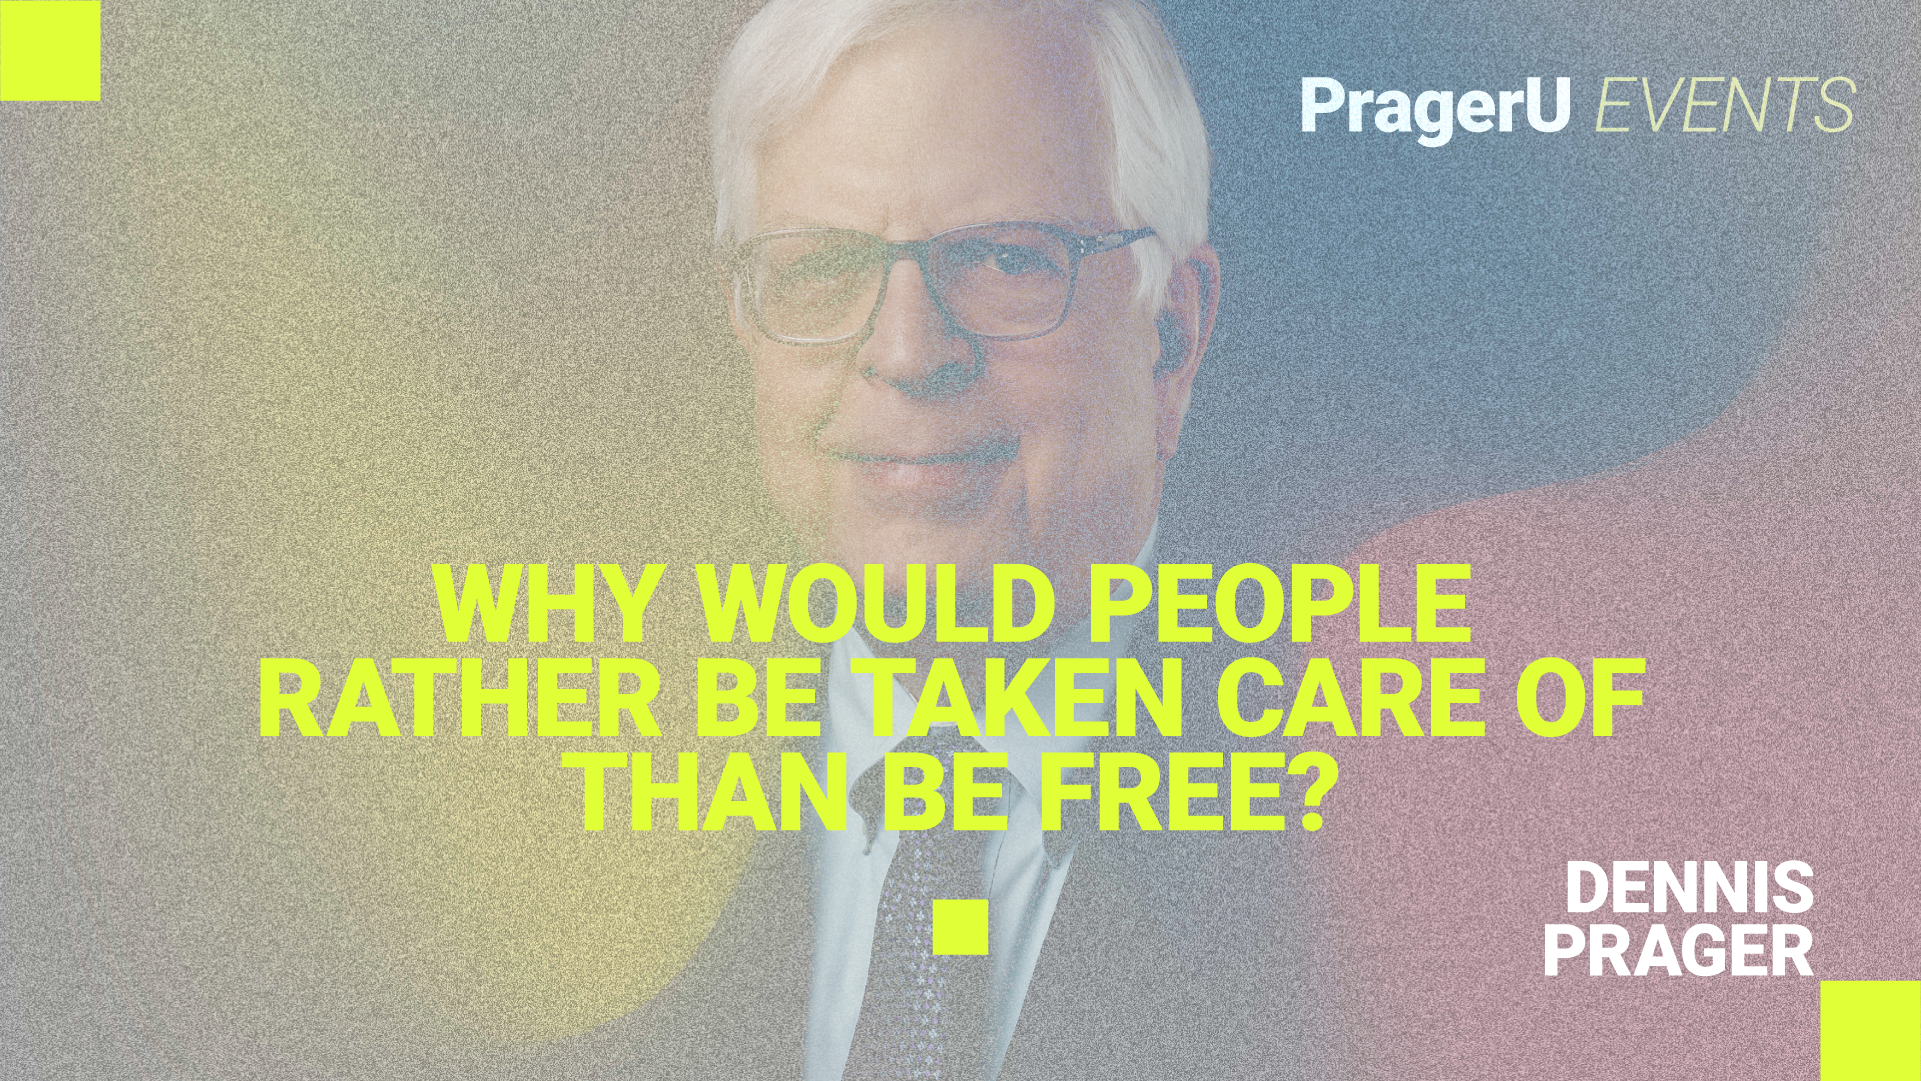 Why Would People Rather Be Taken Care of than Be Free?